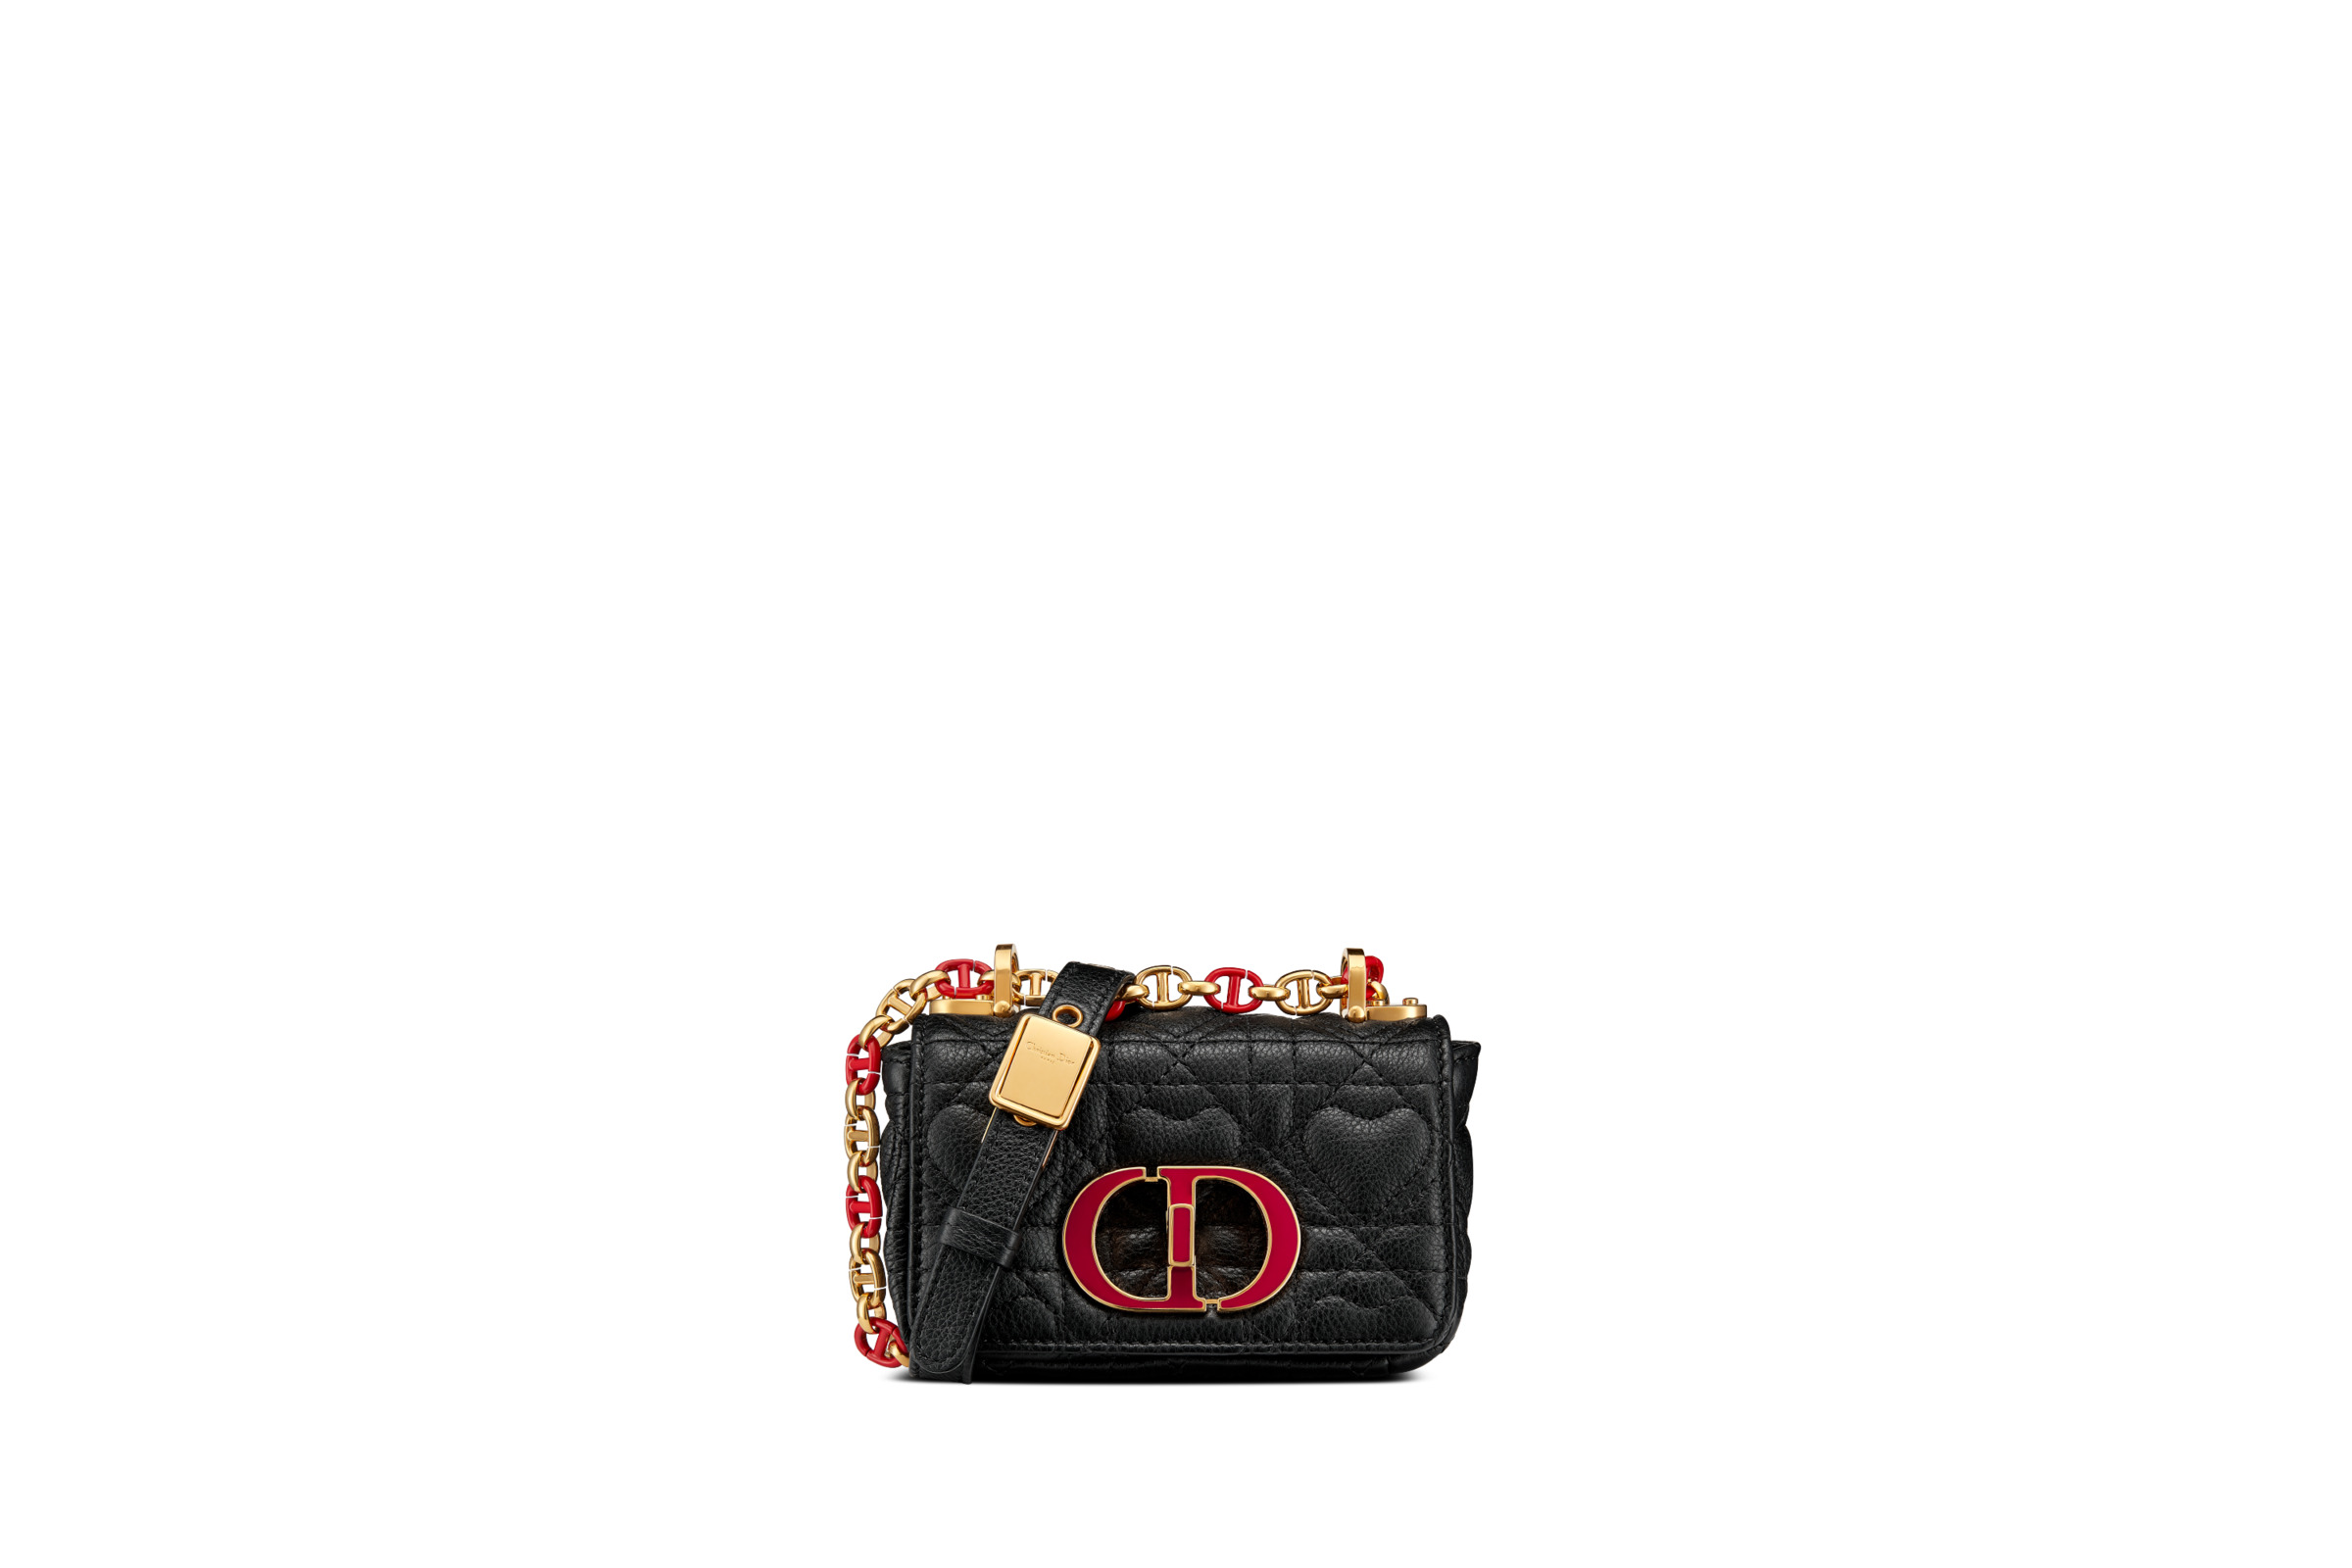 Dior presents a collection of Micro Bags that are miniature versions of  their most iconic designs